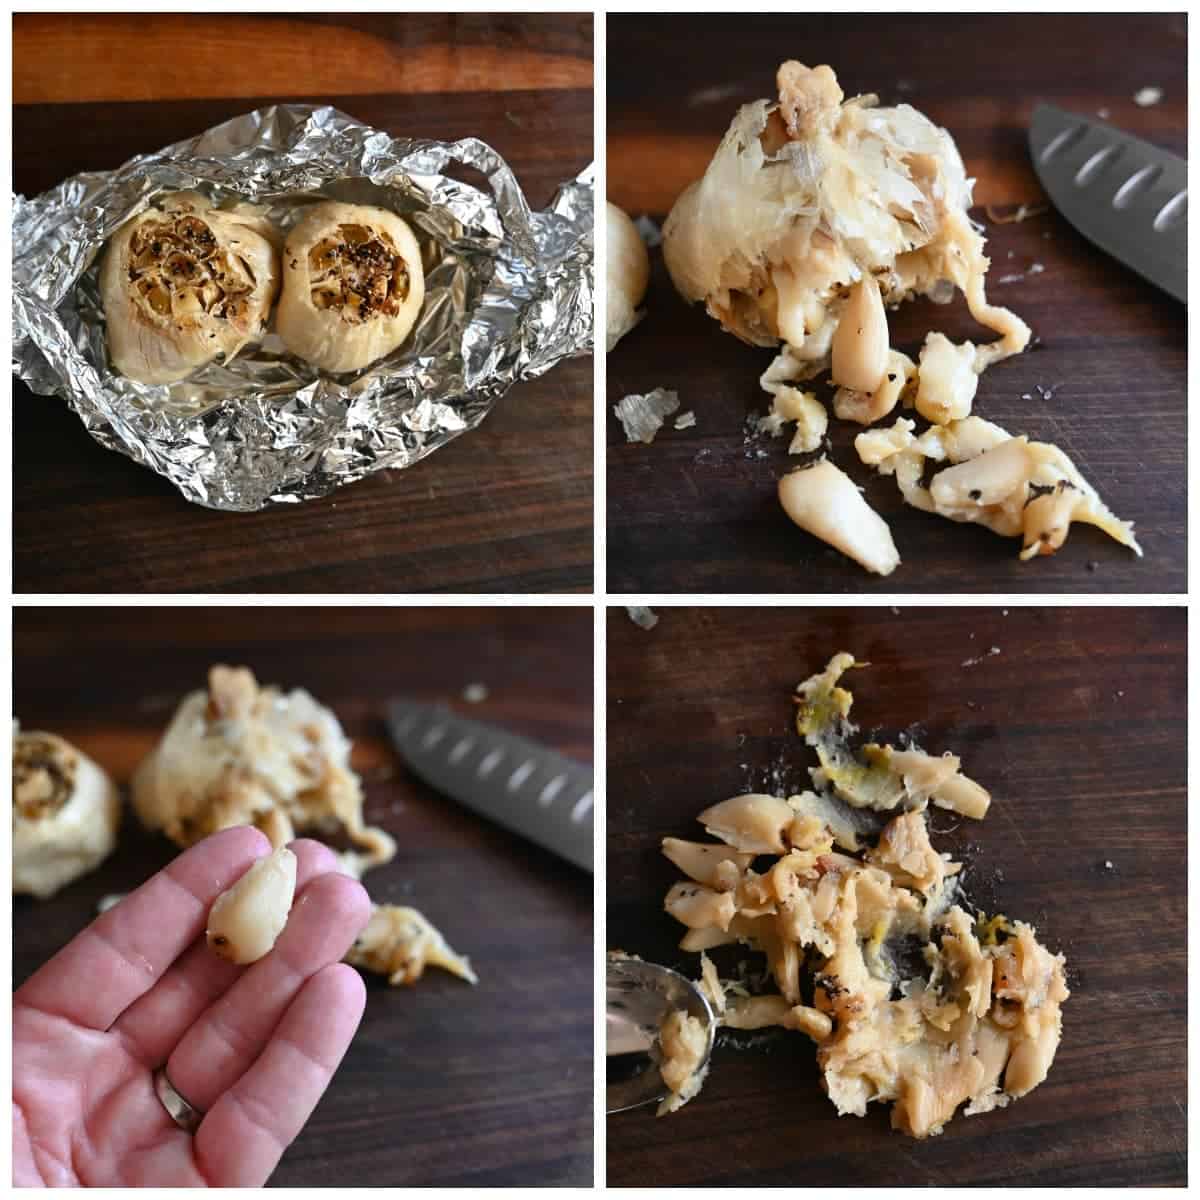 four process photos. First one, garlic bulbs that have been roasted in a piece of aluminium foil. Second one, roasted garlic squeezed out of the skins. Third one, one roasted garlic clove being help in a hand. Fourth one, roasted garlic all removed from the skins and on a wooden cutting board.